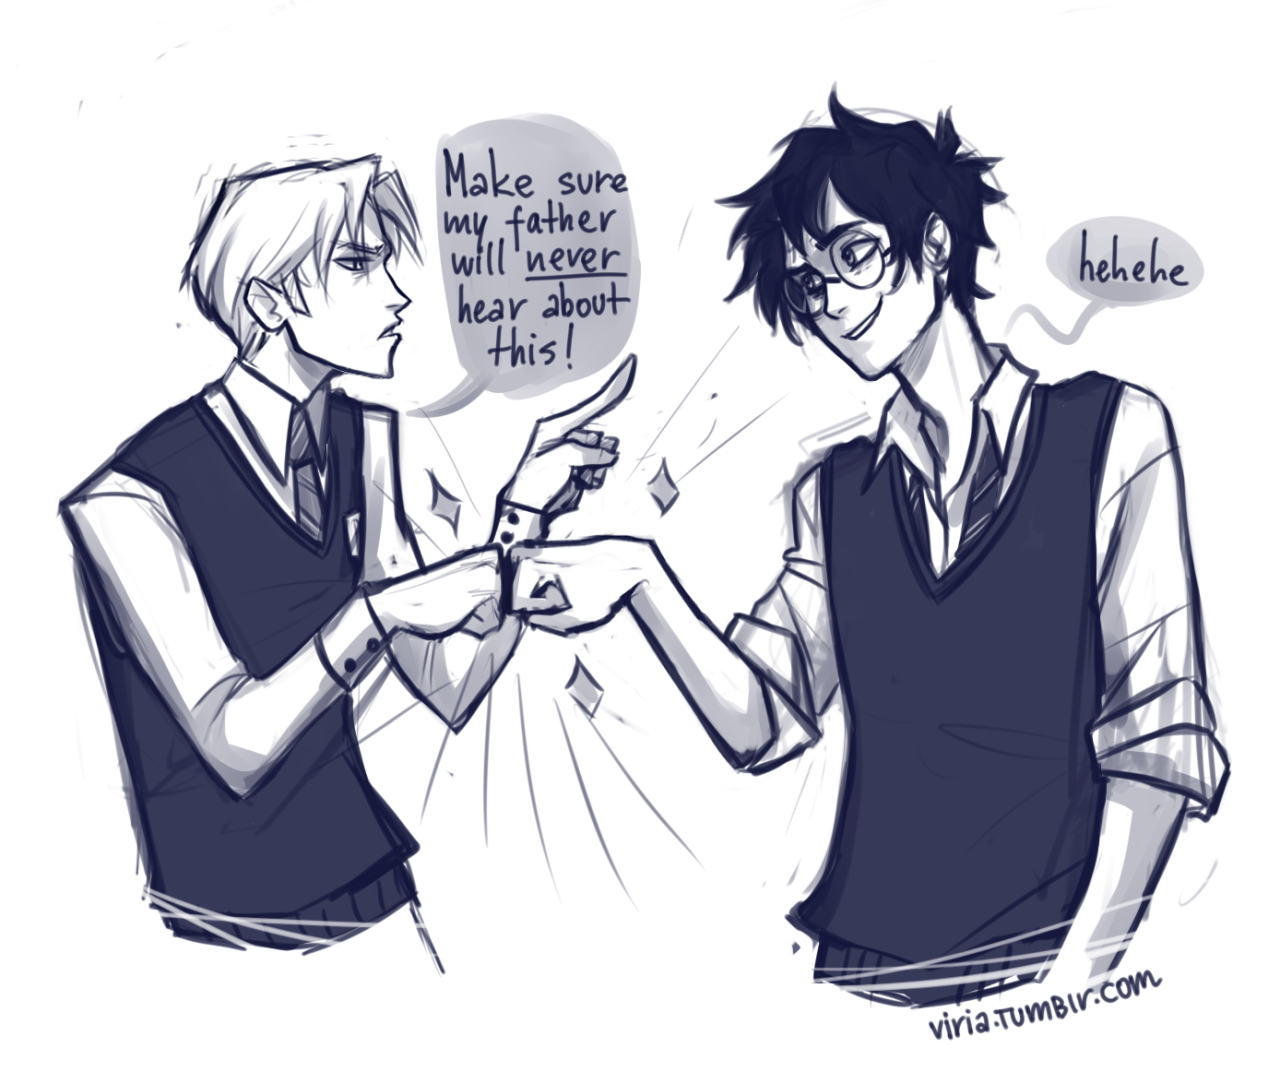 viria:  someone said I should draw some Harry and Draco, but since I don’t exactly